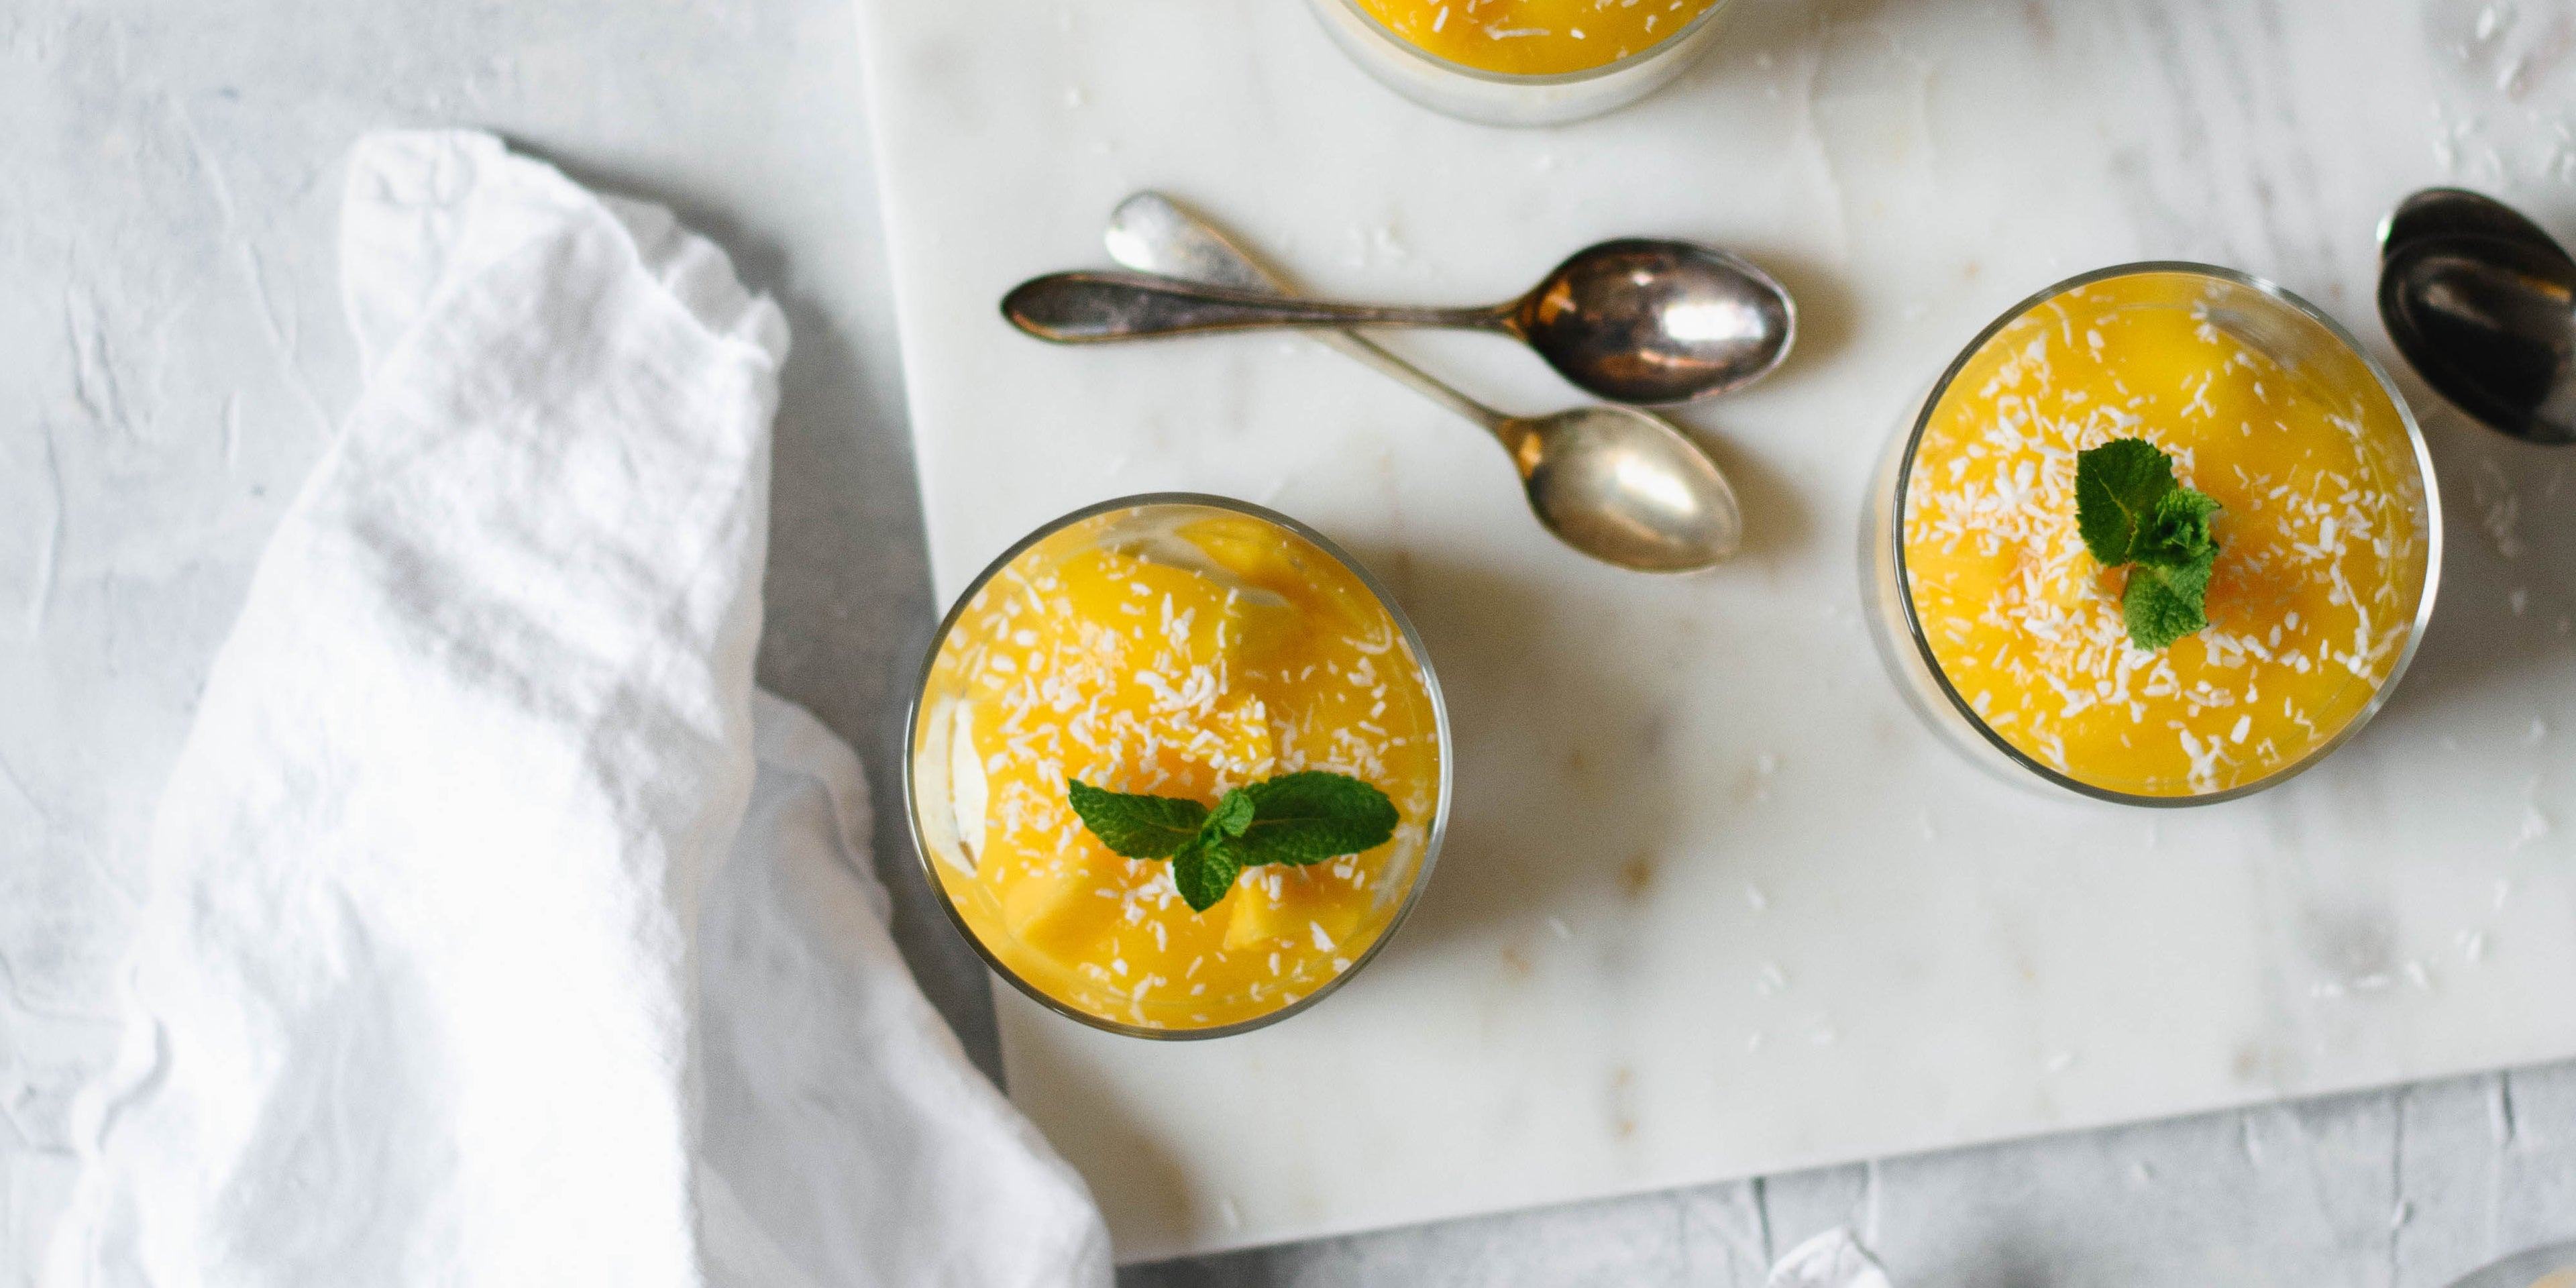 Overhead of small glasses of mango syllabub with sprig of mint on top and two spoons